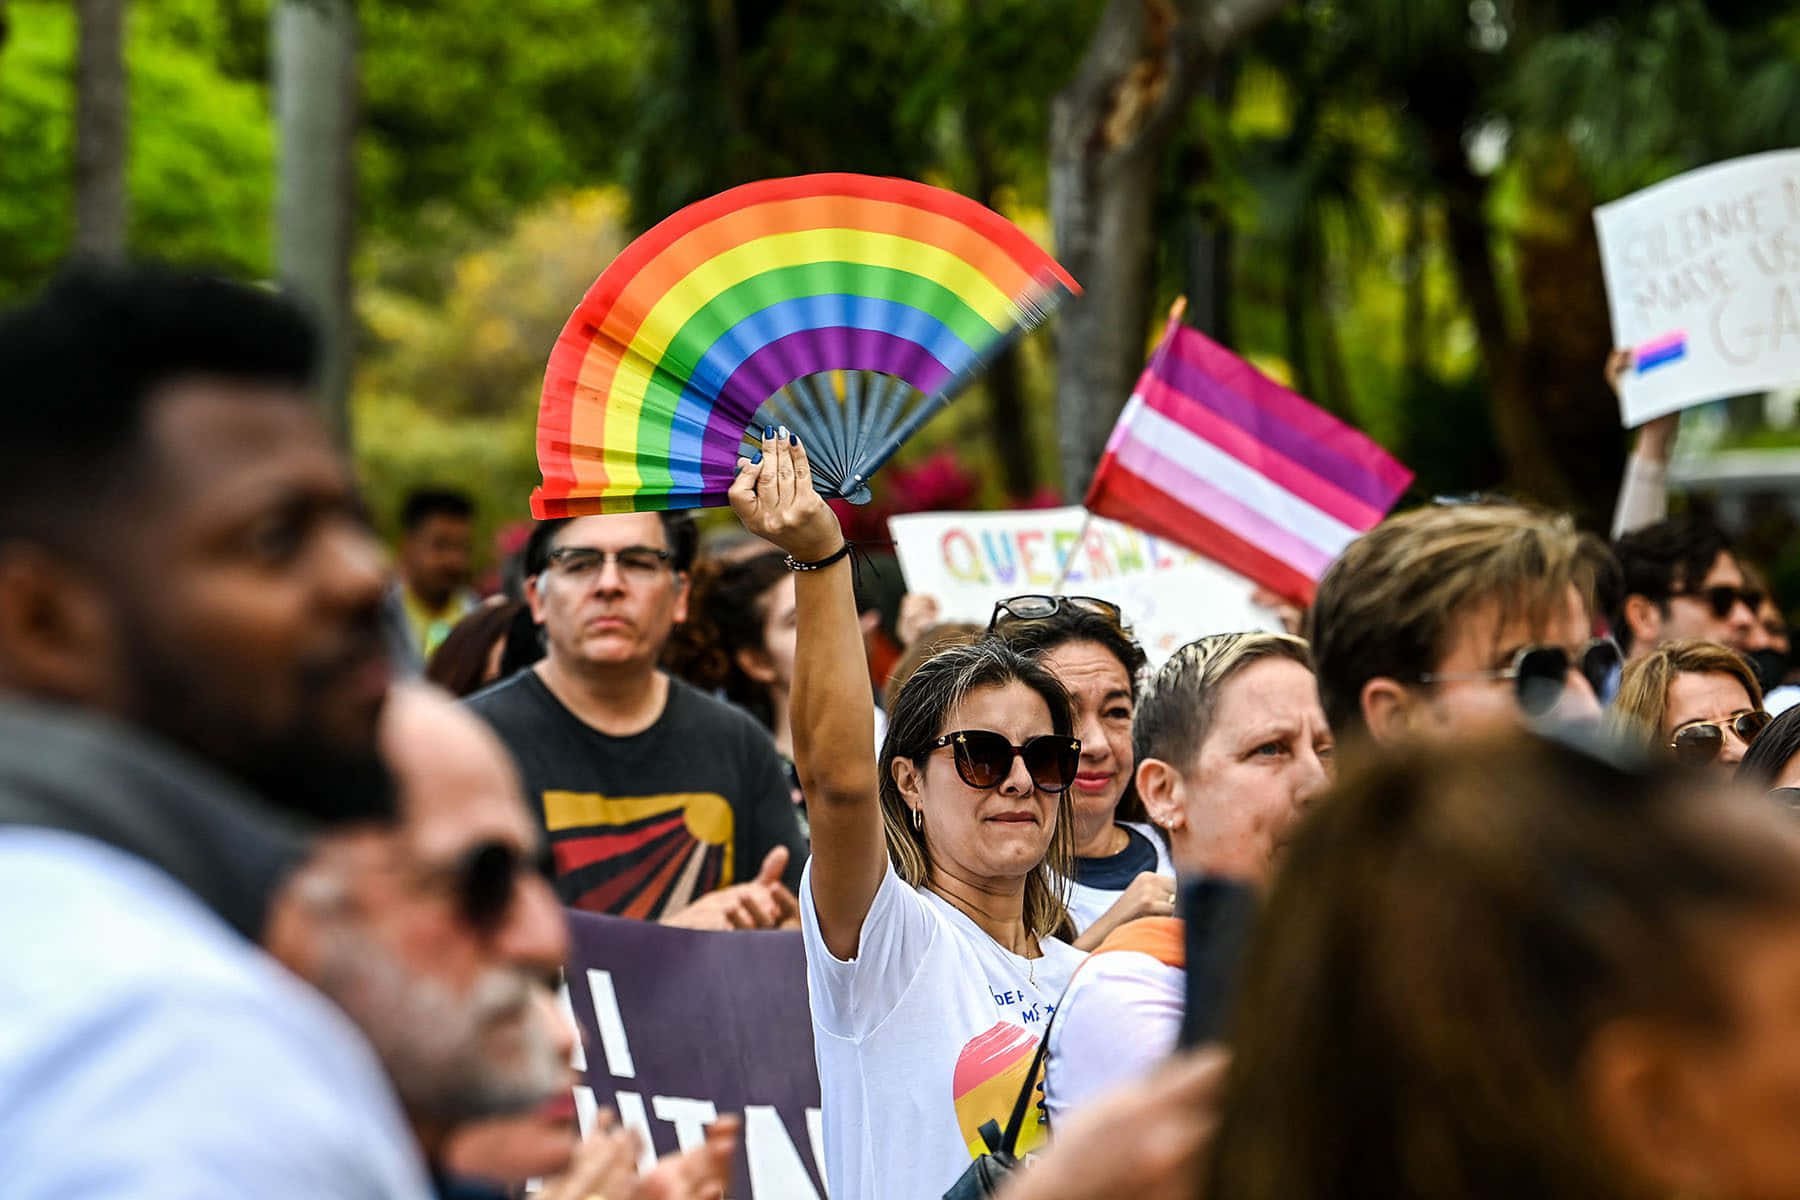 A Group Of People Holding Up A Rainbow Flag